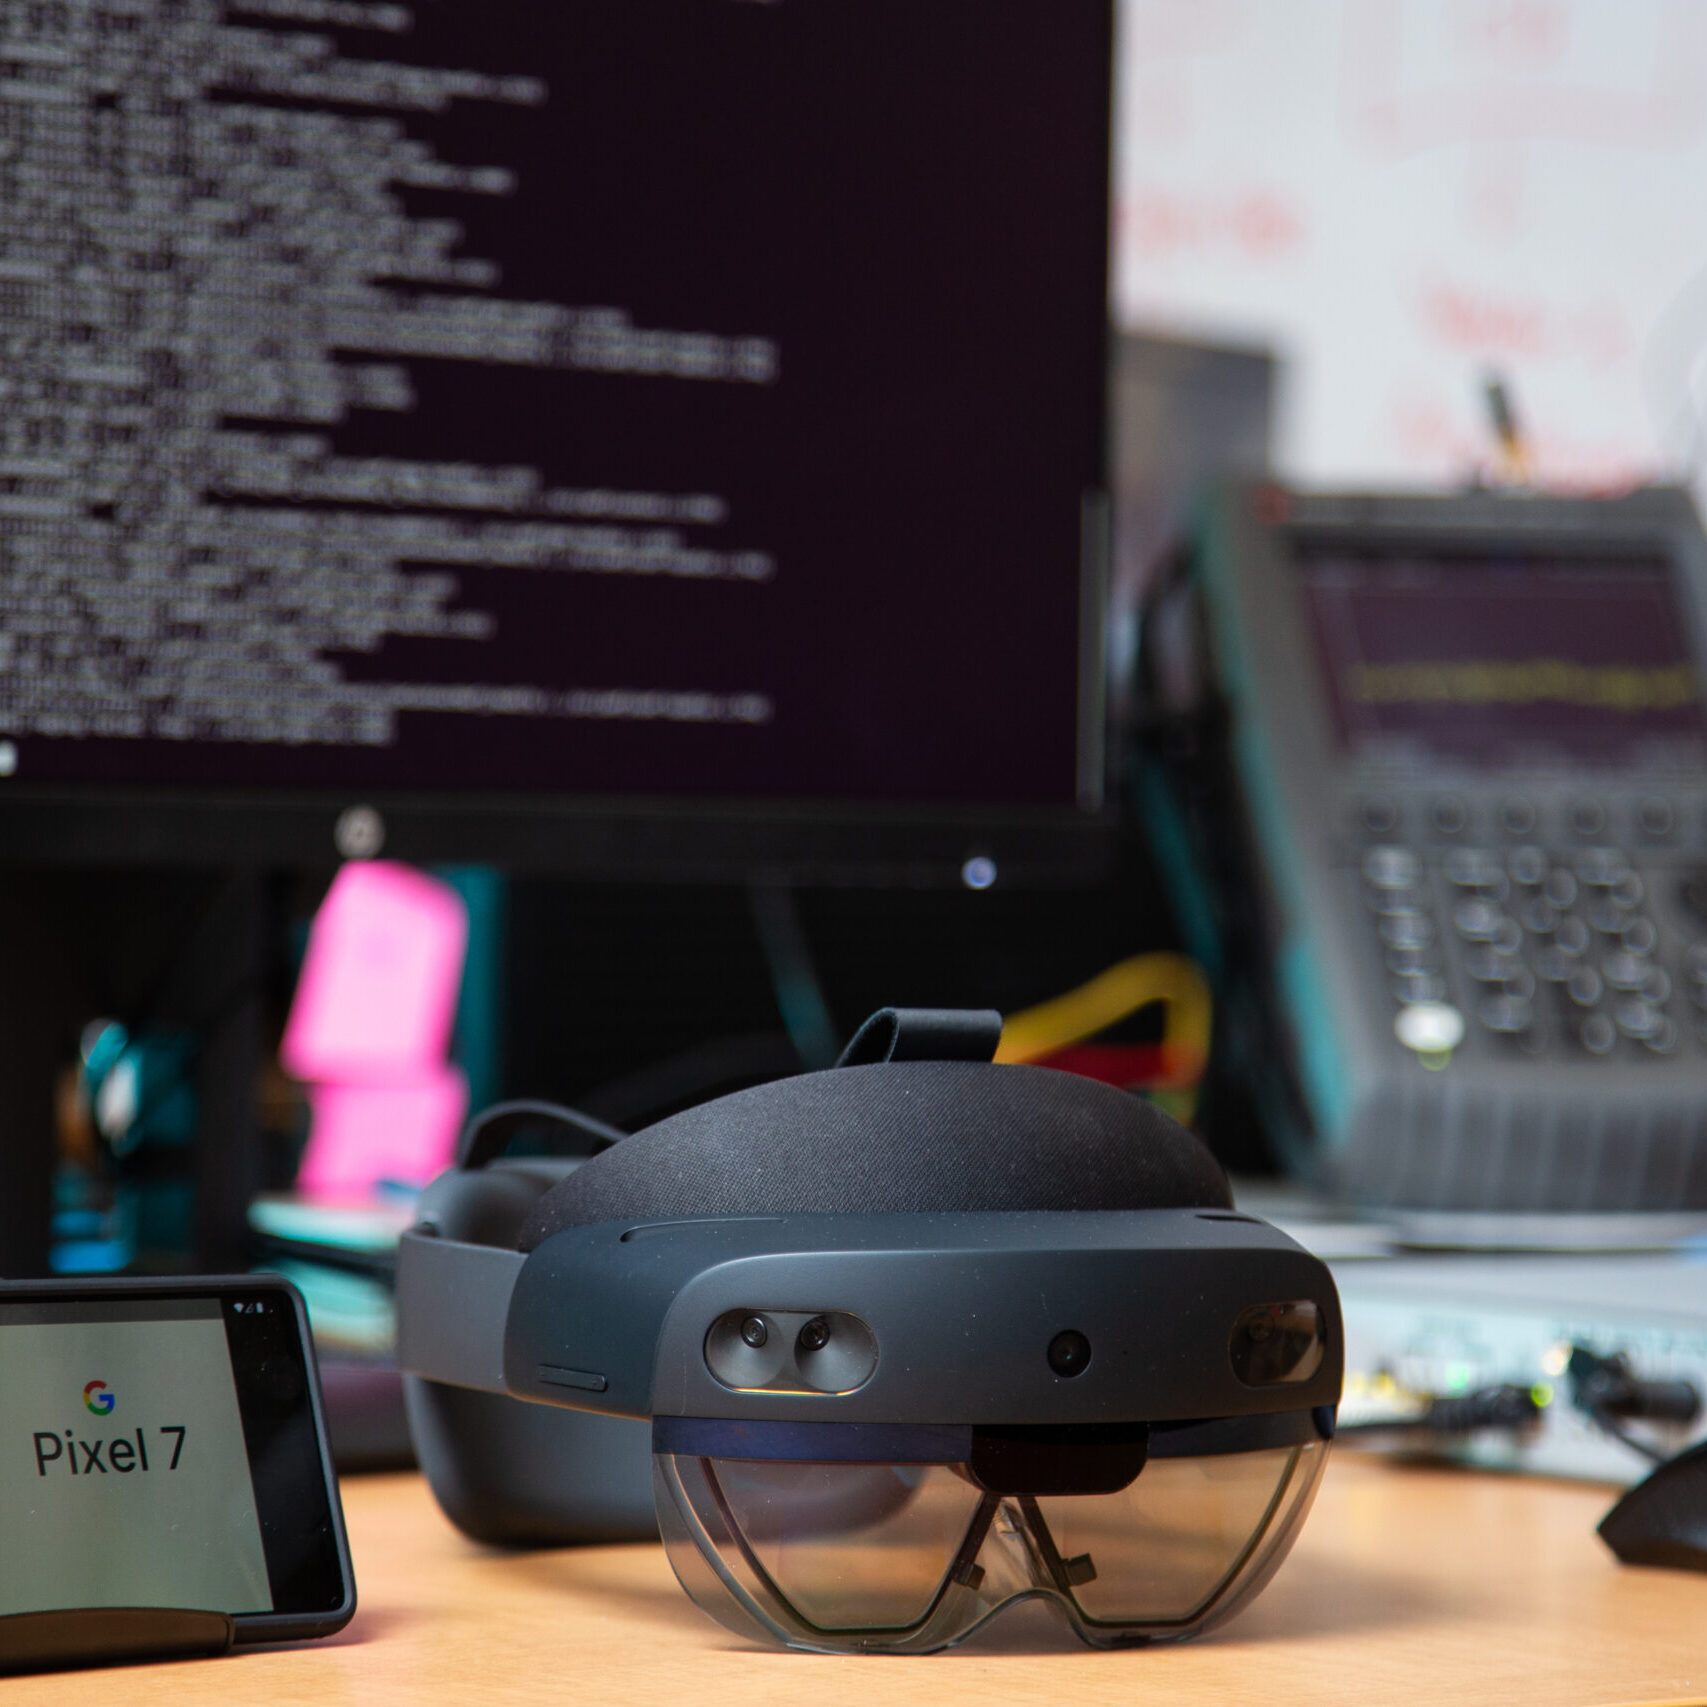 Photo of a Mixed Reality headset and Spectrum Sensing equipment in the background